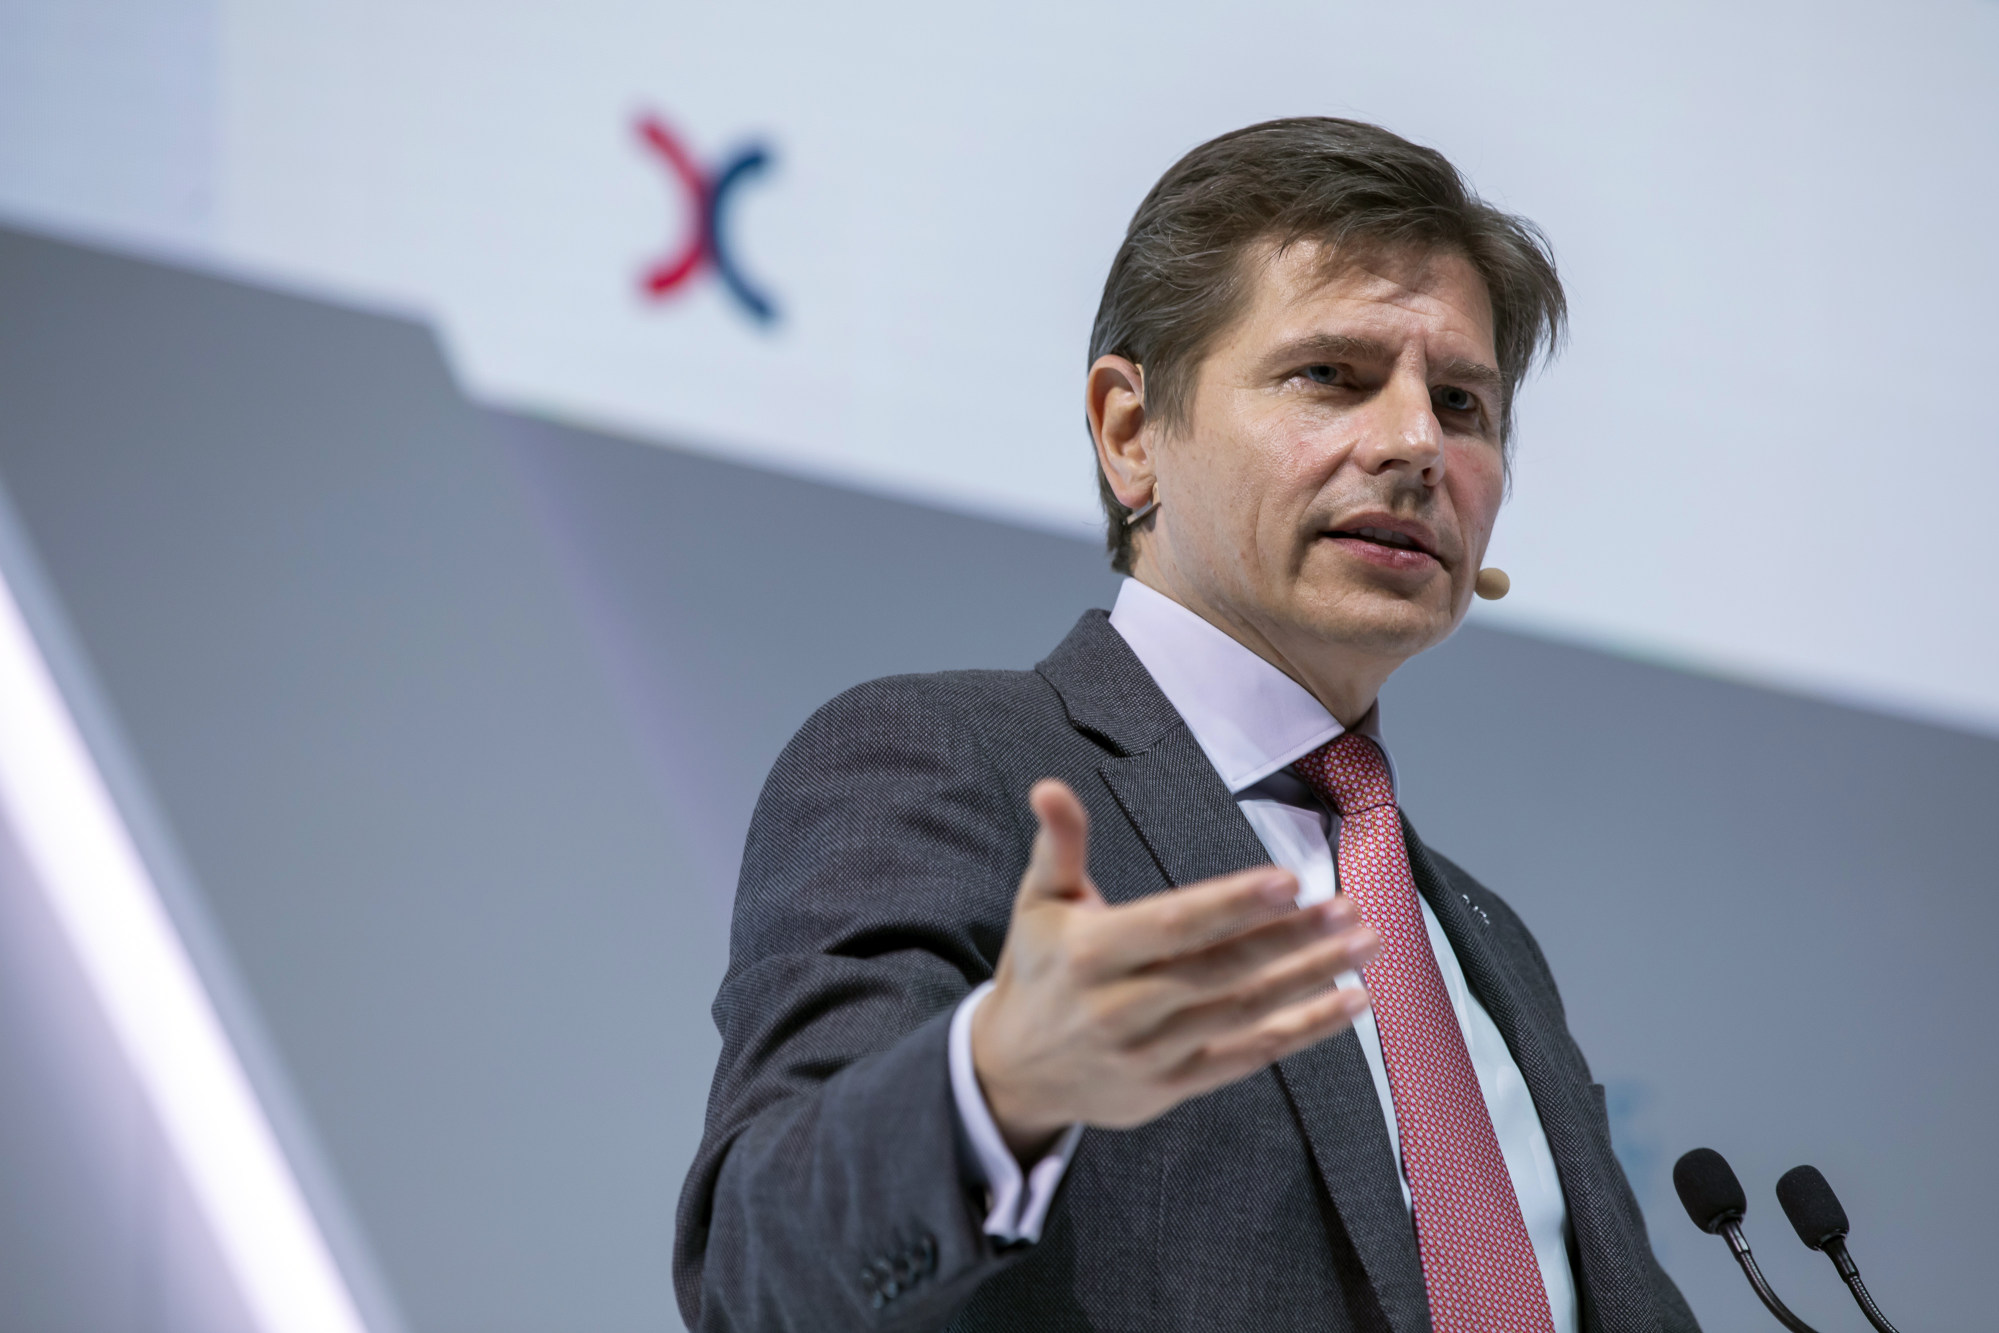 HKEX CEO Nicolas Aguzin completes a year in the job on May 24. Photo: Bloomberg